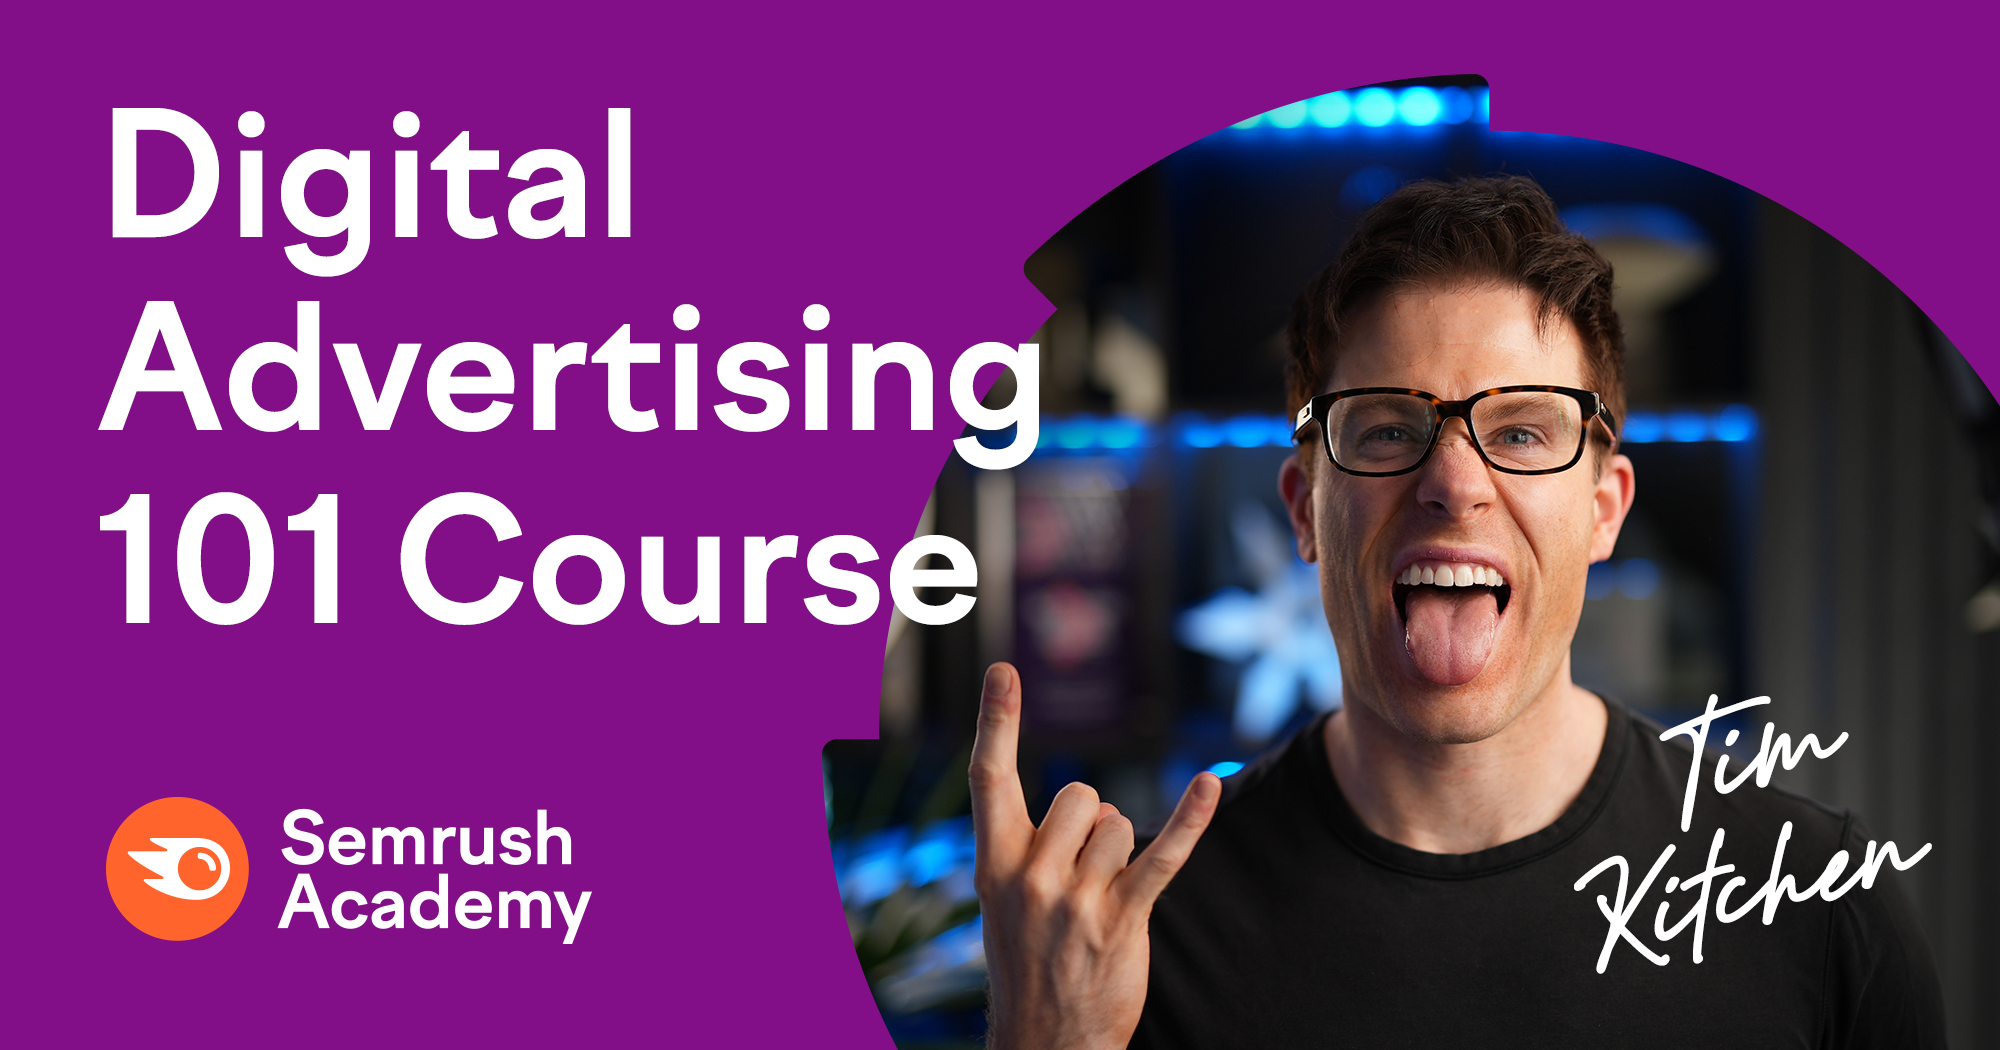 Digital Advertising 101 Certification Course